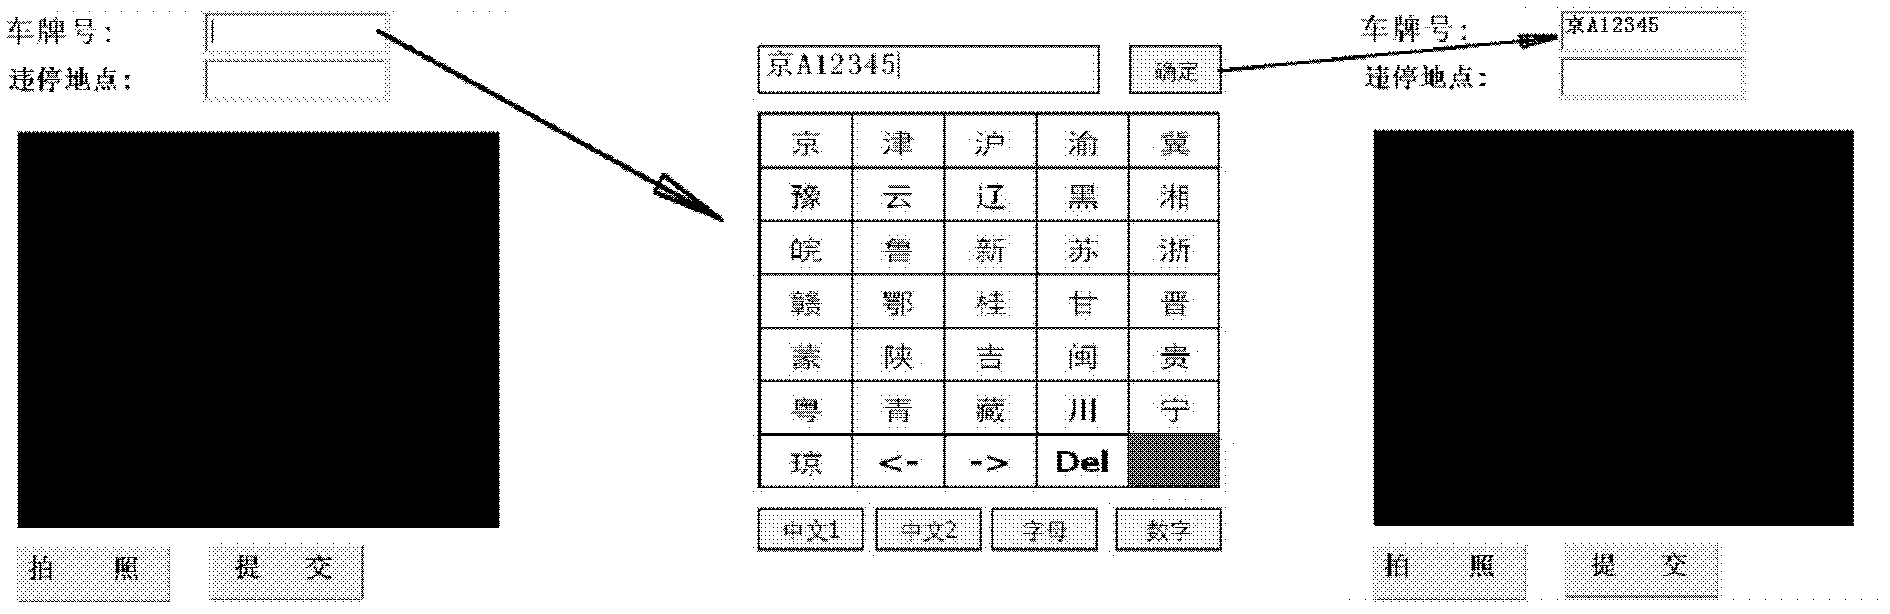 Method for rapidly inputting license plate numbers to PDA (personal digital assistant) equipment through virtual keyboard